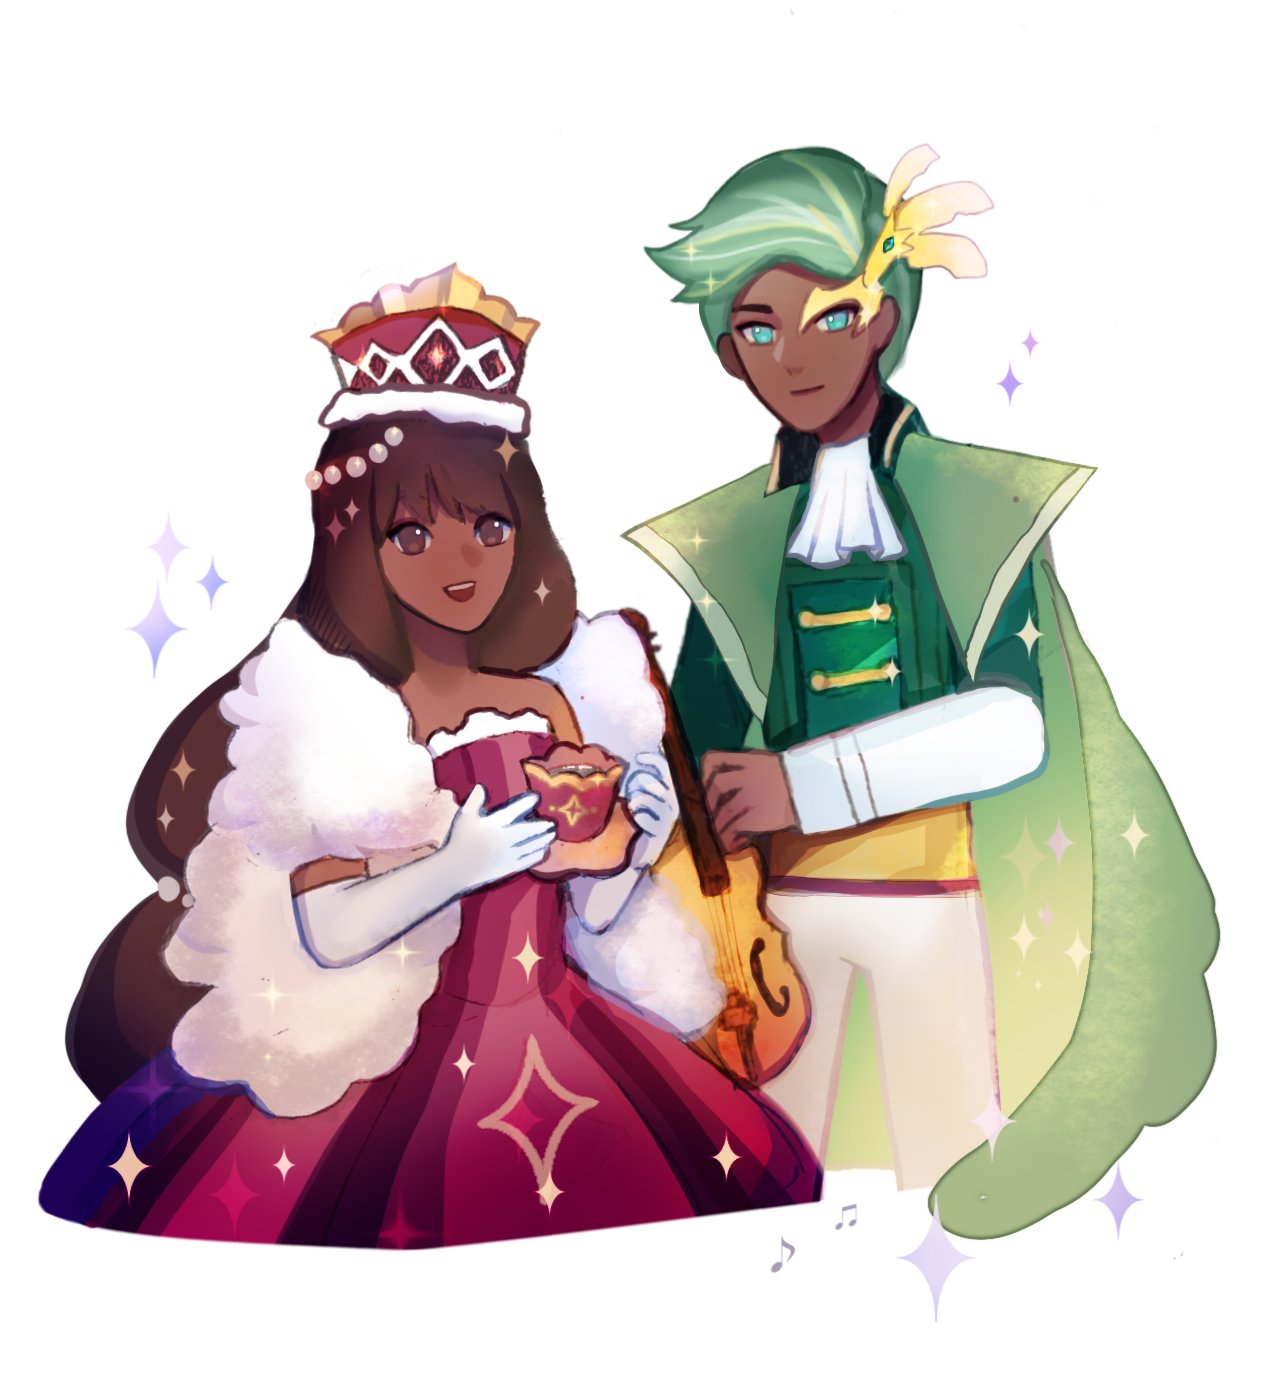 I love Cocoa and Mint Choco's costumes, so I made them as my